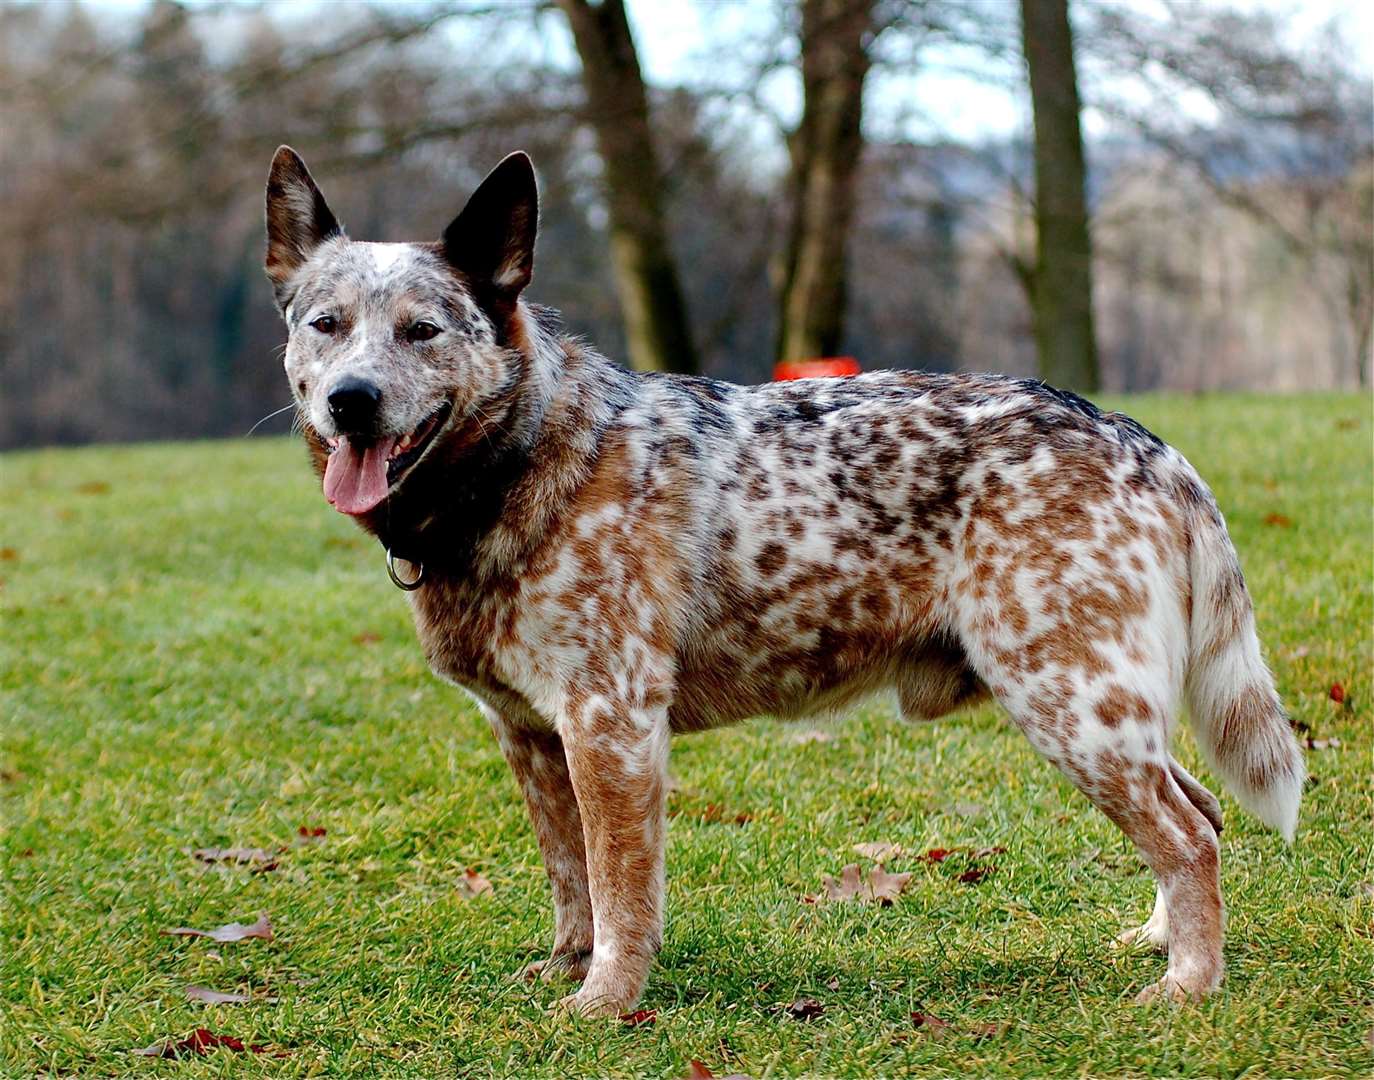 An example of an Australian Cattle Dog. Image courtesy of Wikipedia.